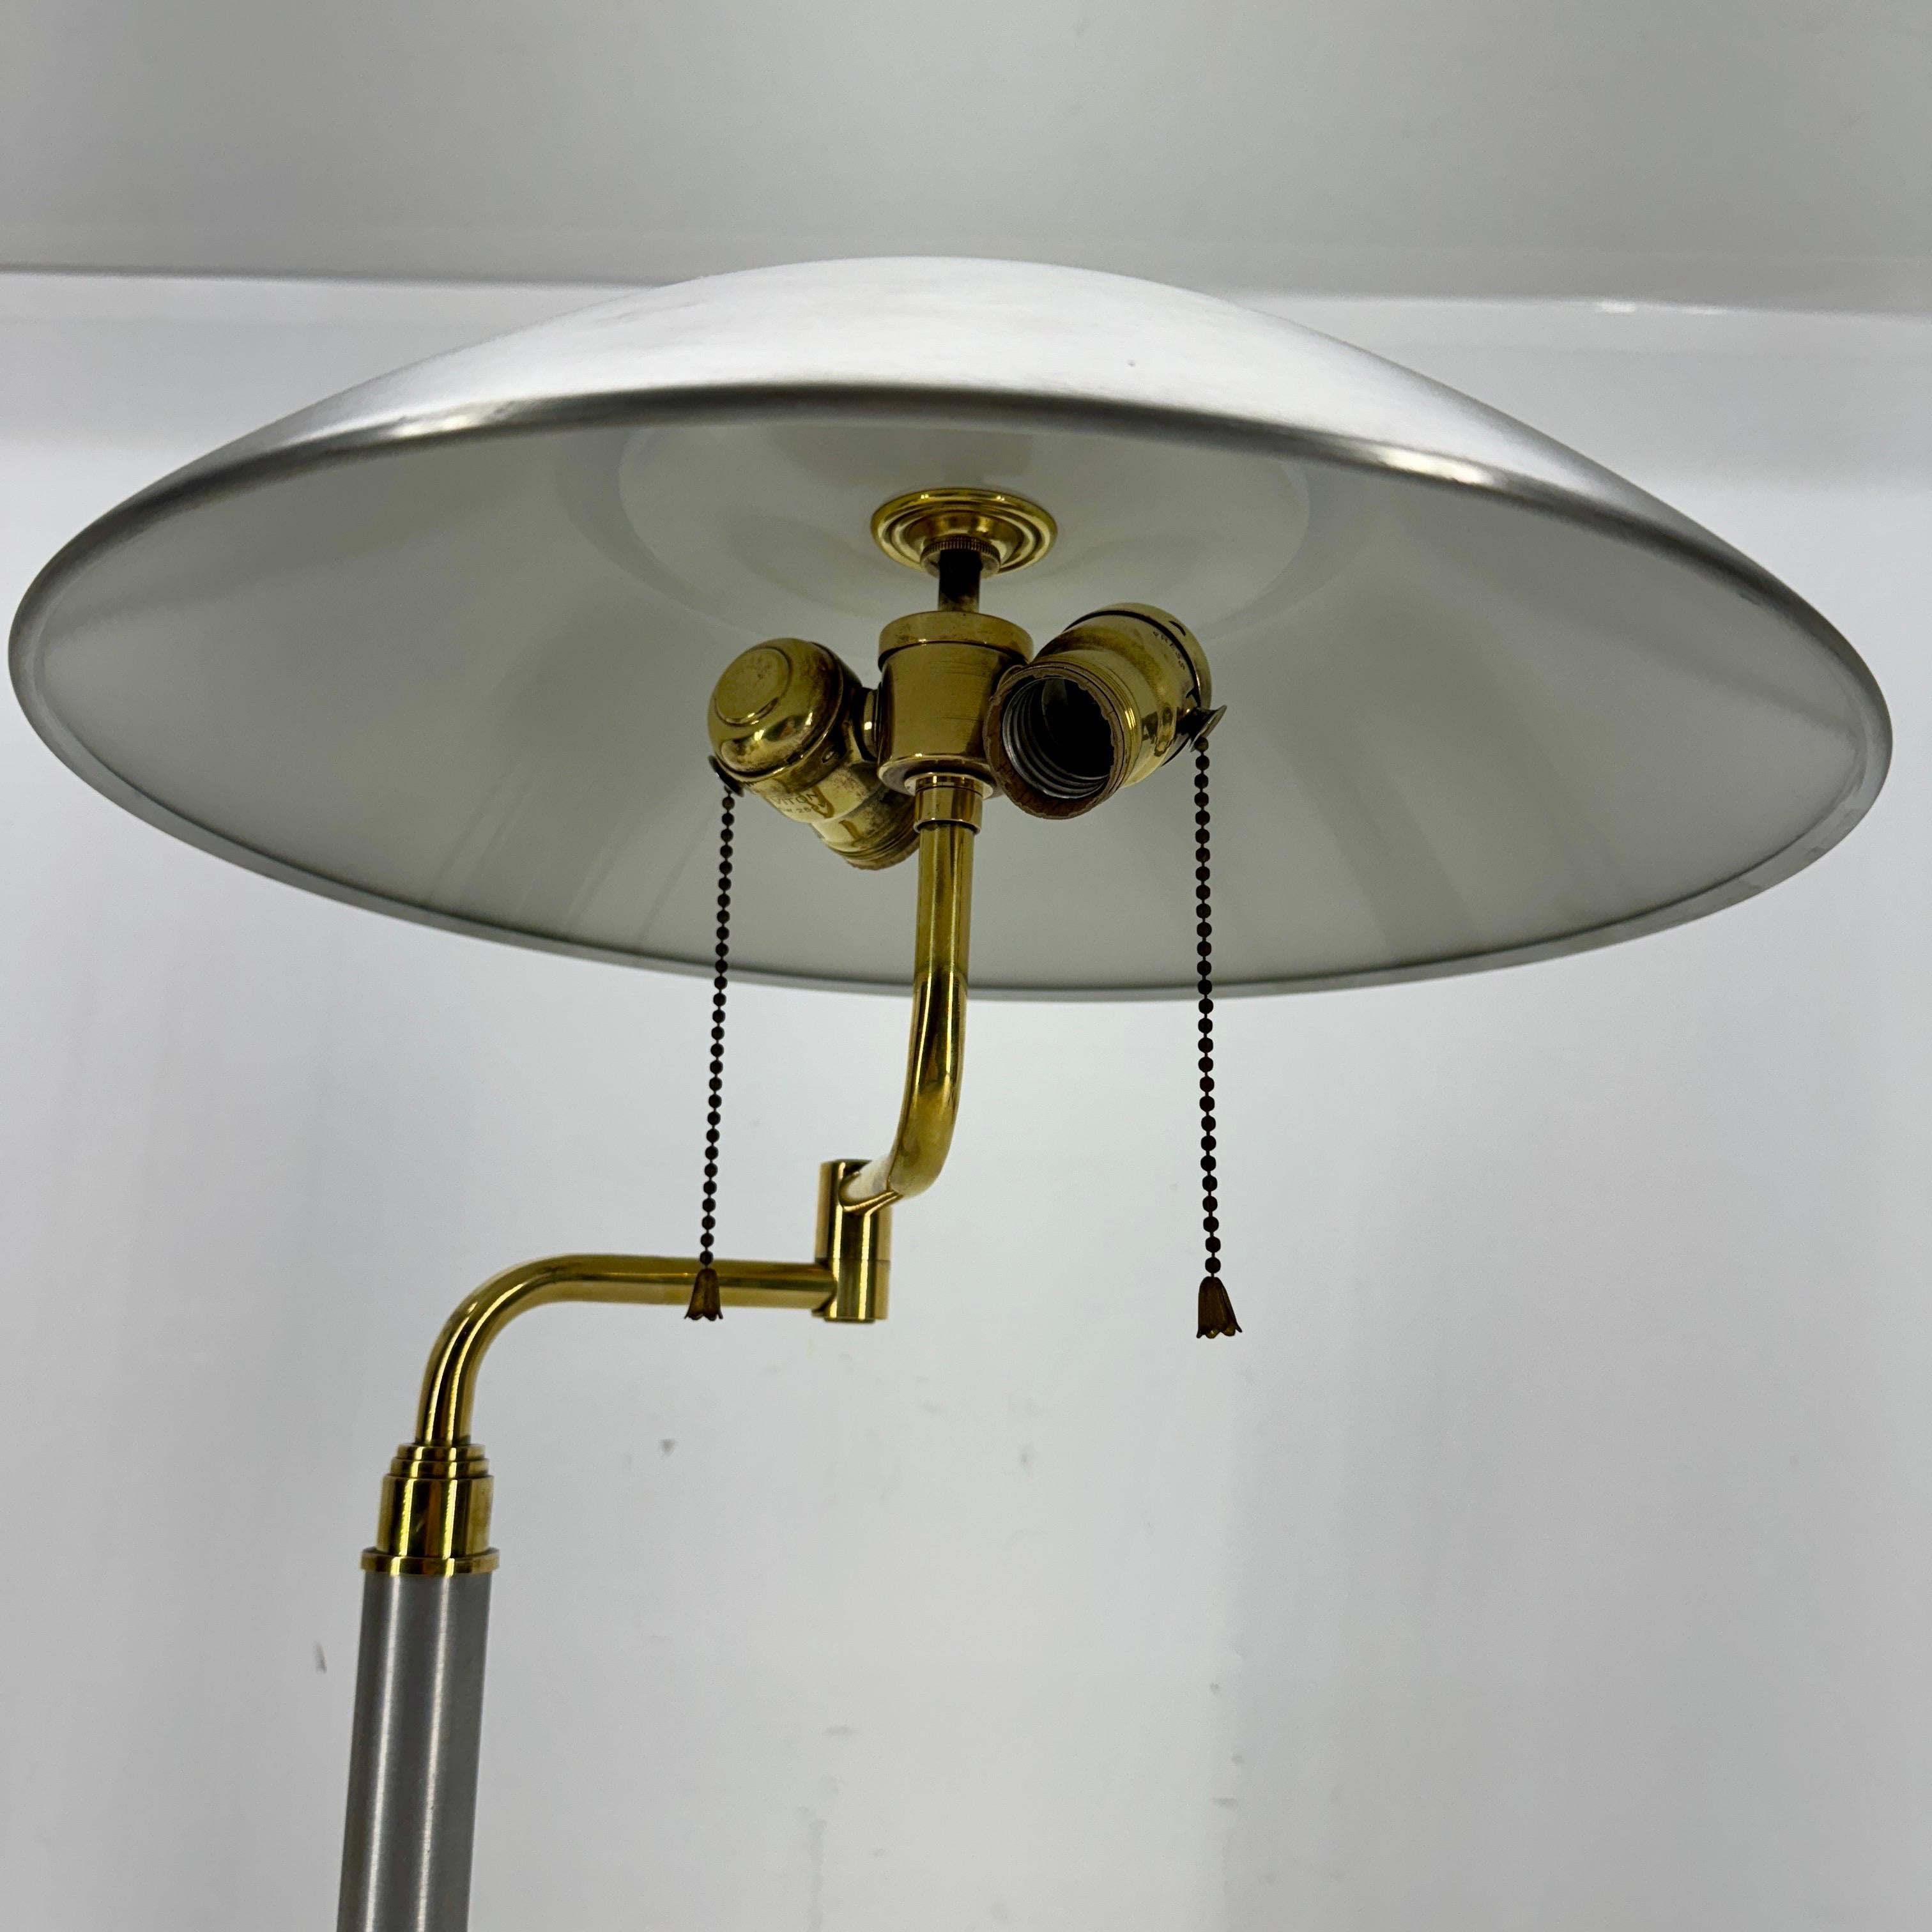 American Vintage Mid-Century Modern Desk Lamp in Aluminum and Brass  For Sale 5